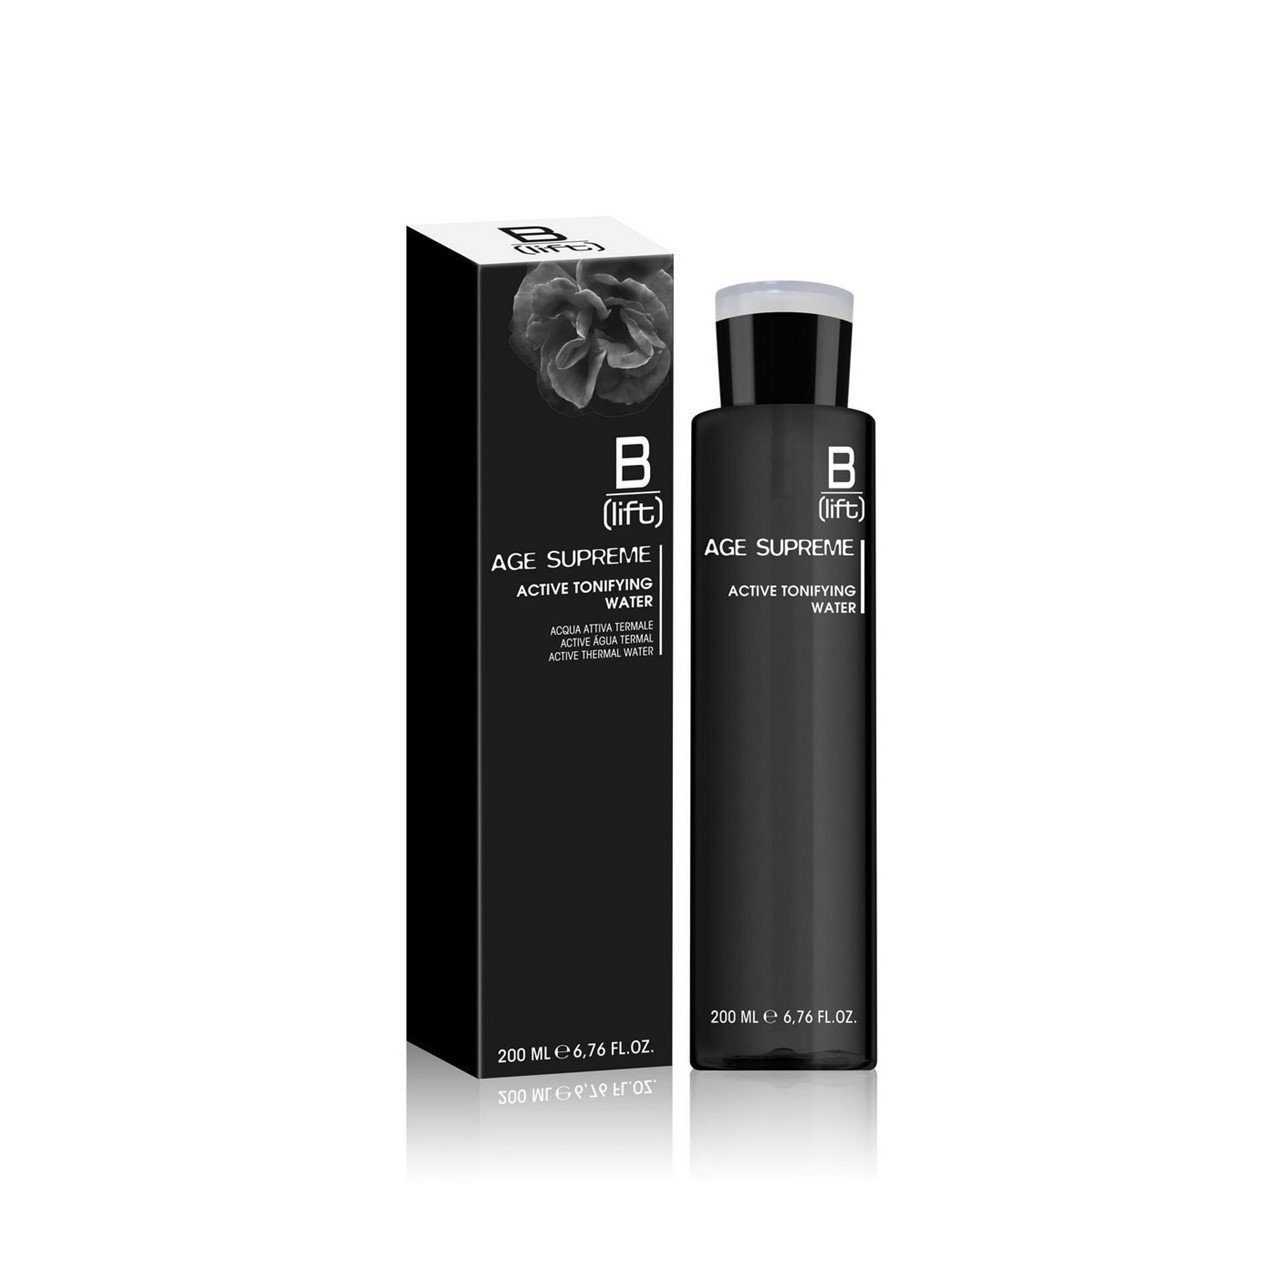 B-Lift Age Supreme Active Tonifying Water 200ml